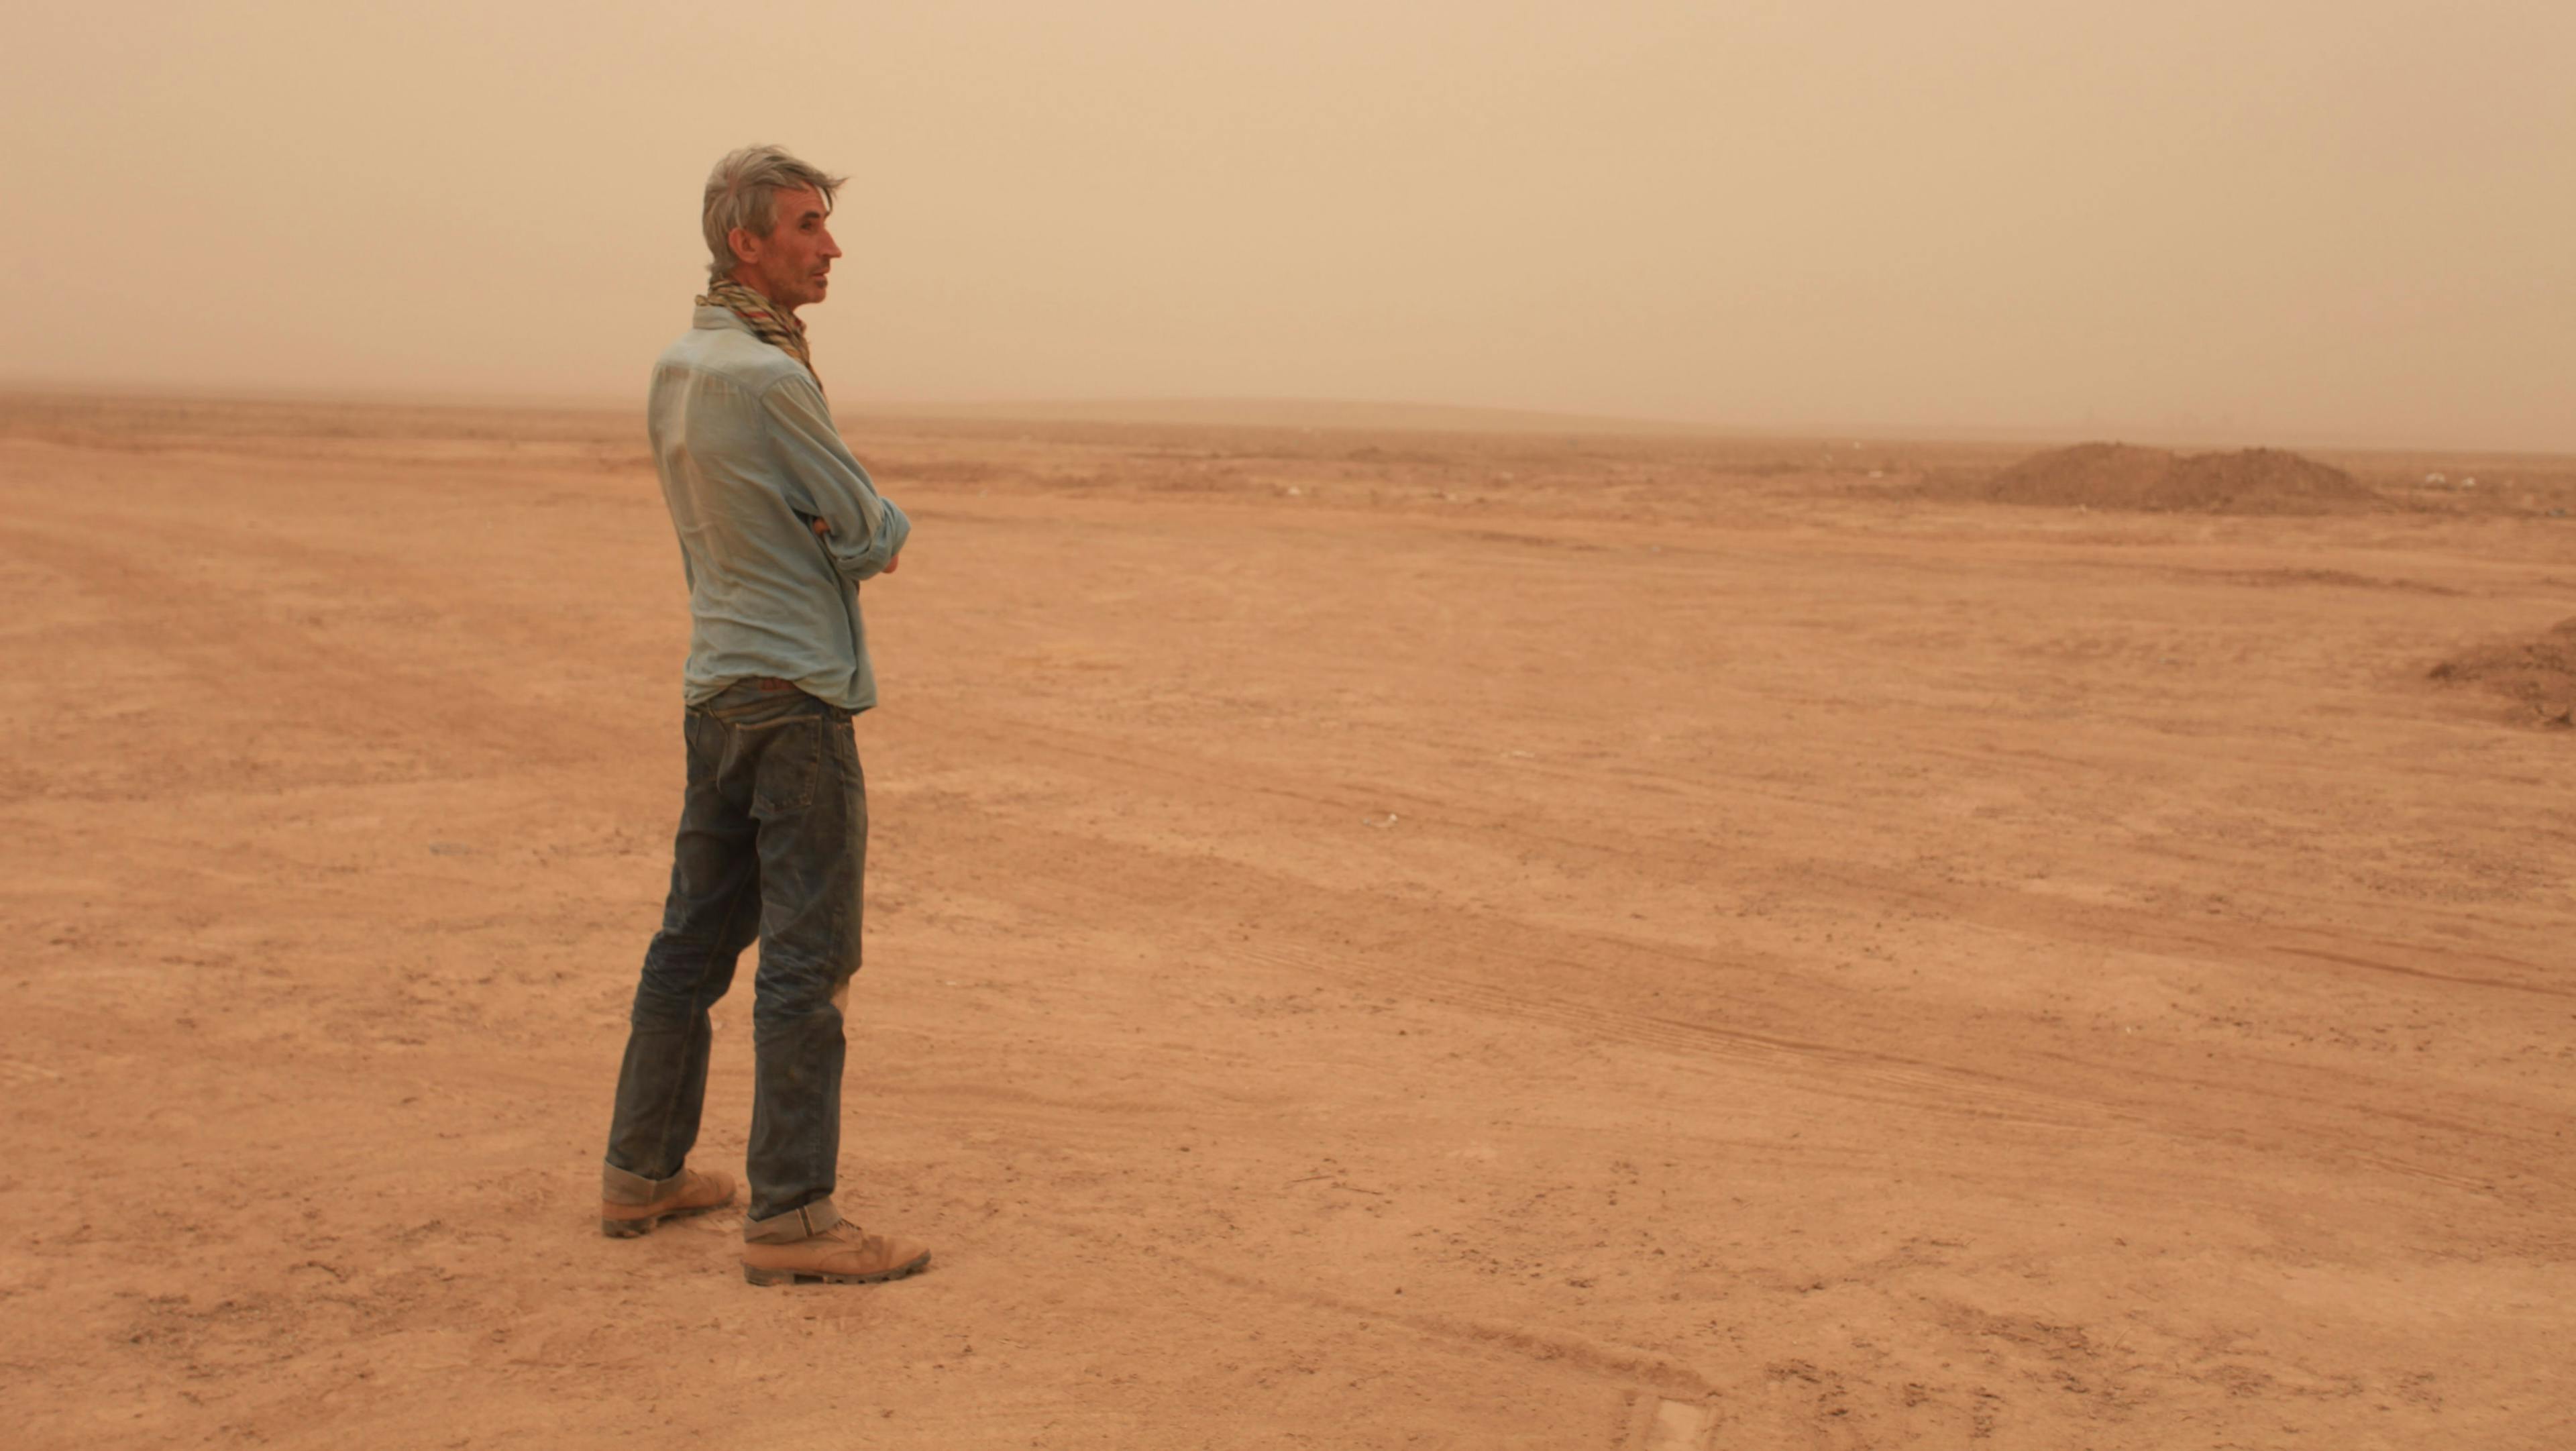 Francis Alÿs in Iraq, dated 2016. Photo by Akam Shex Hadi.